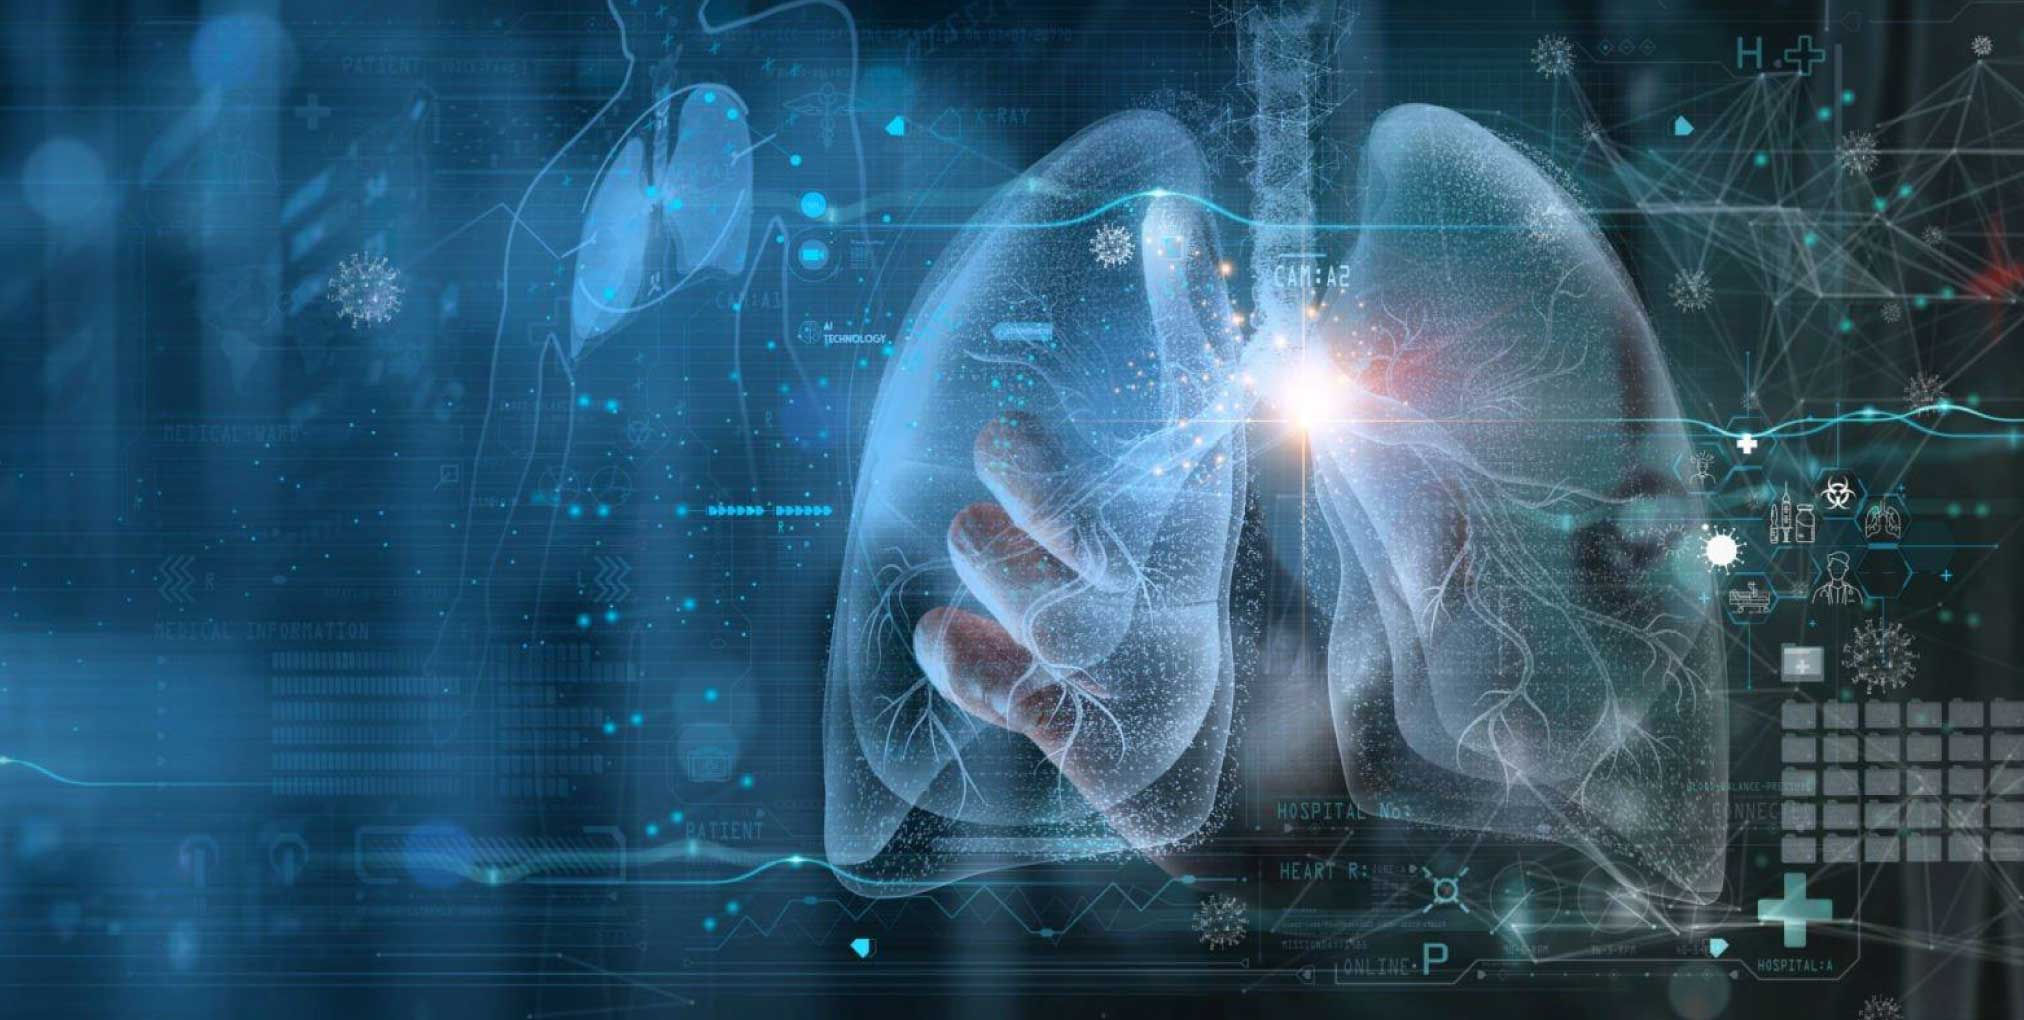 detection-of-lung-diseases-through-X-ray-images